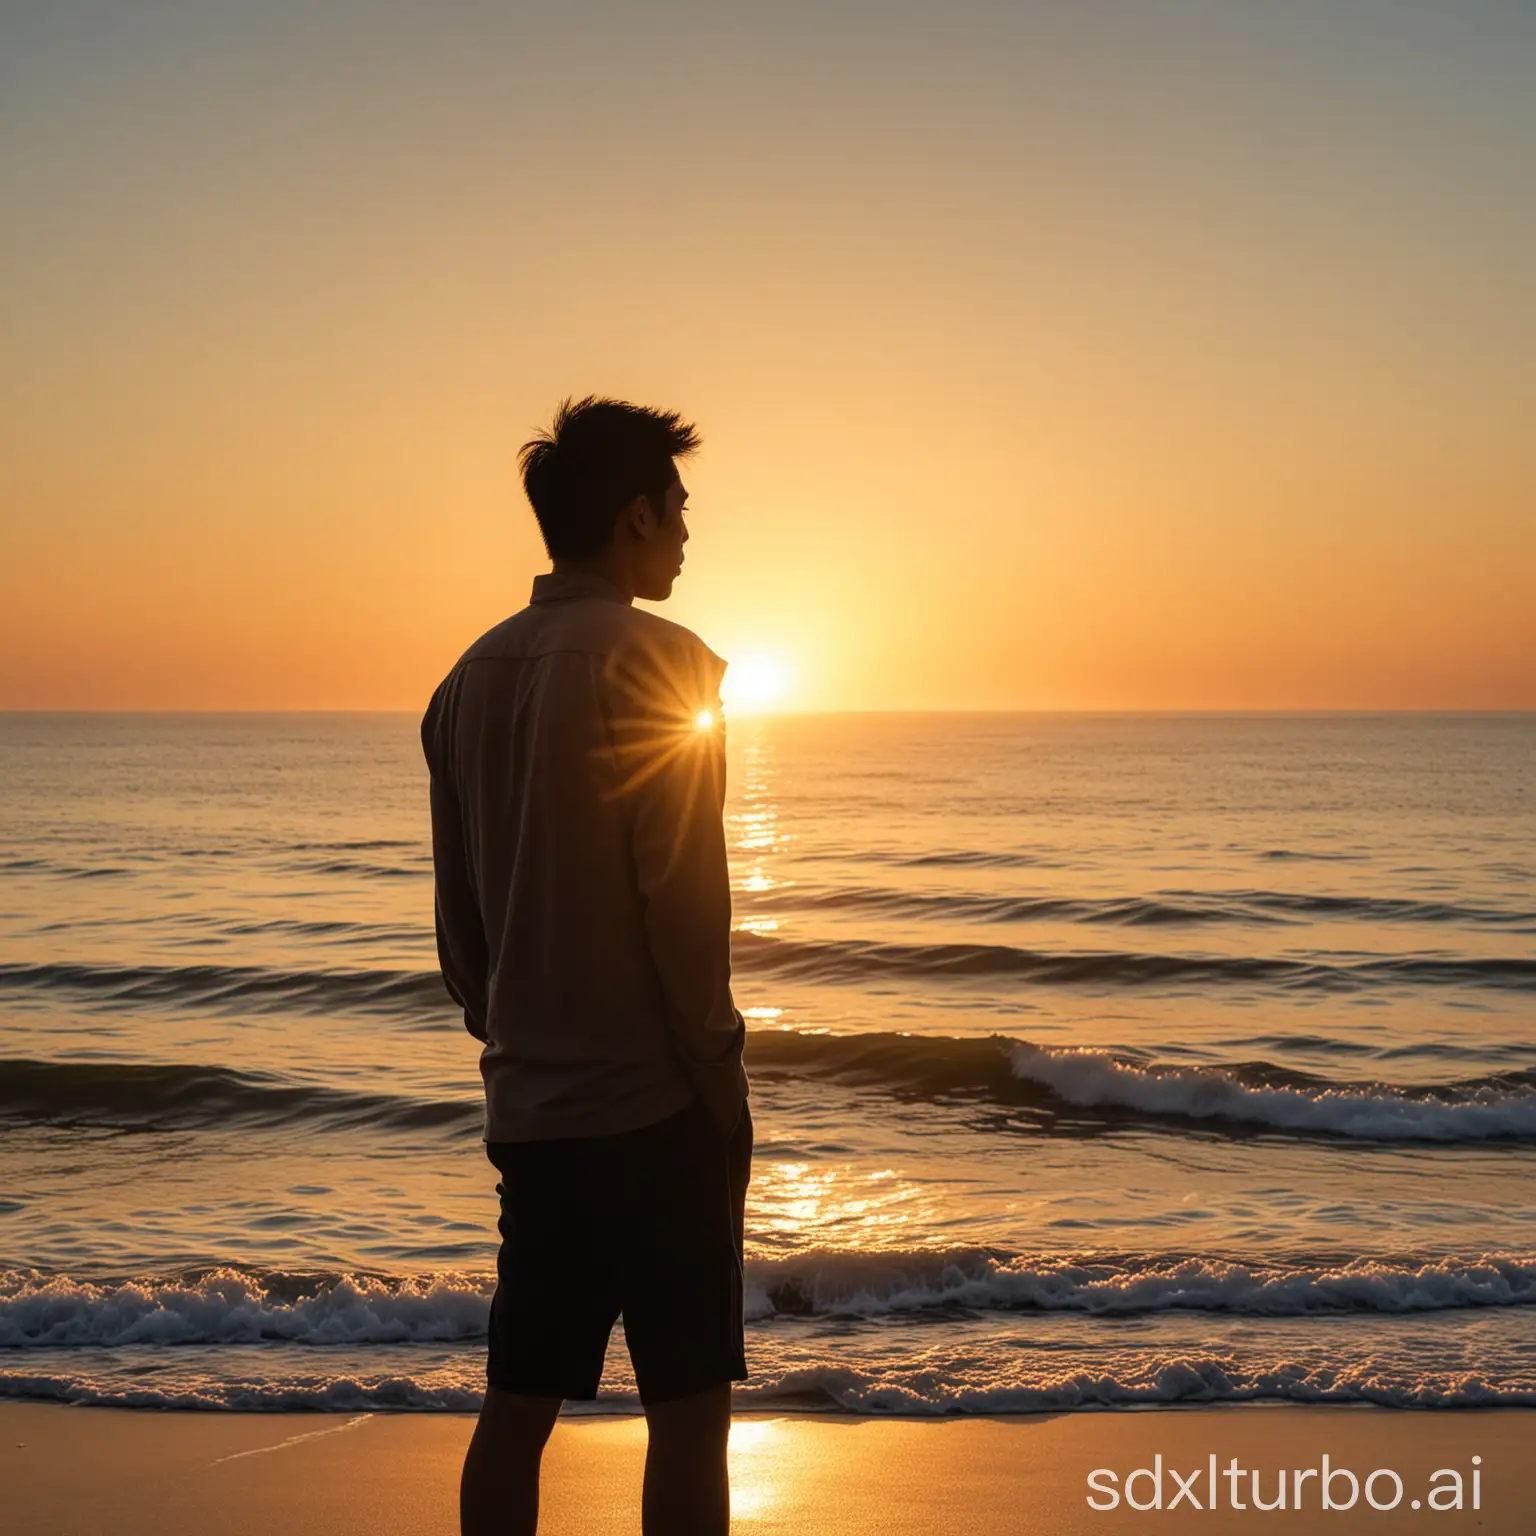 A strong and handsome Chinese man with a parted hair stands by the sea watching the sunrise silhouette.